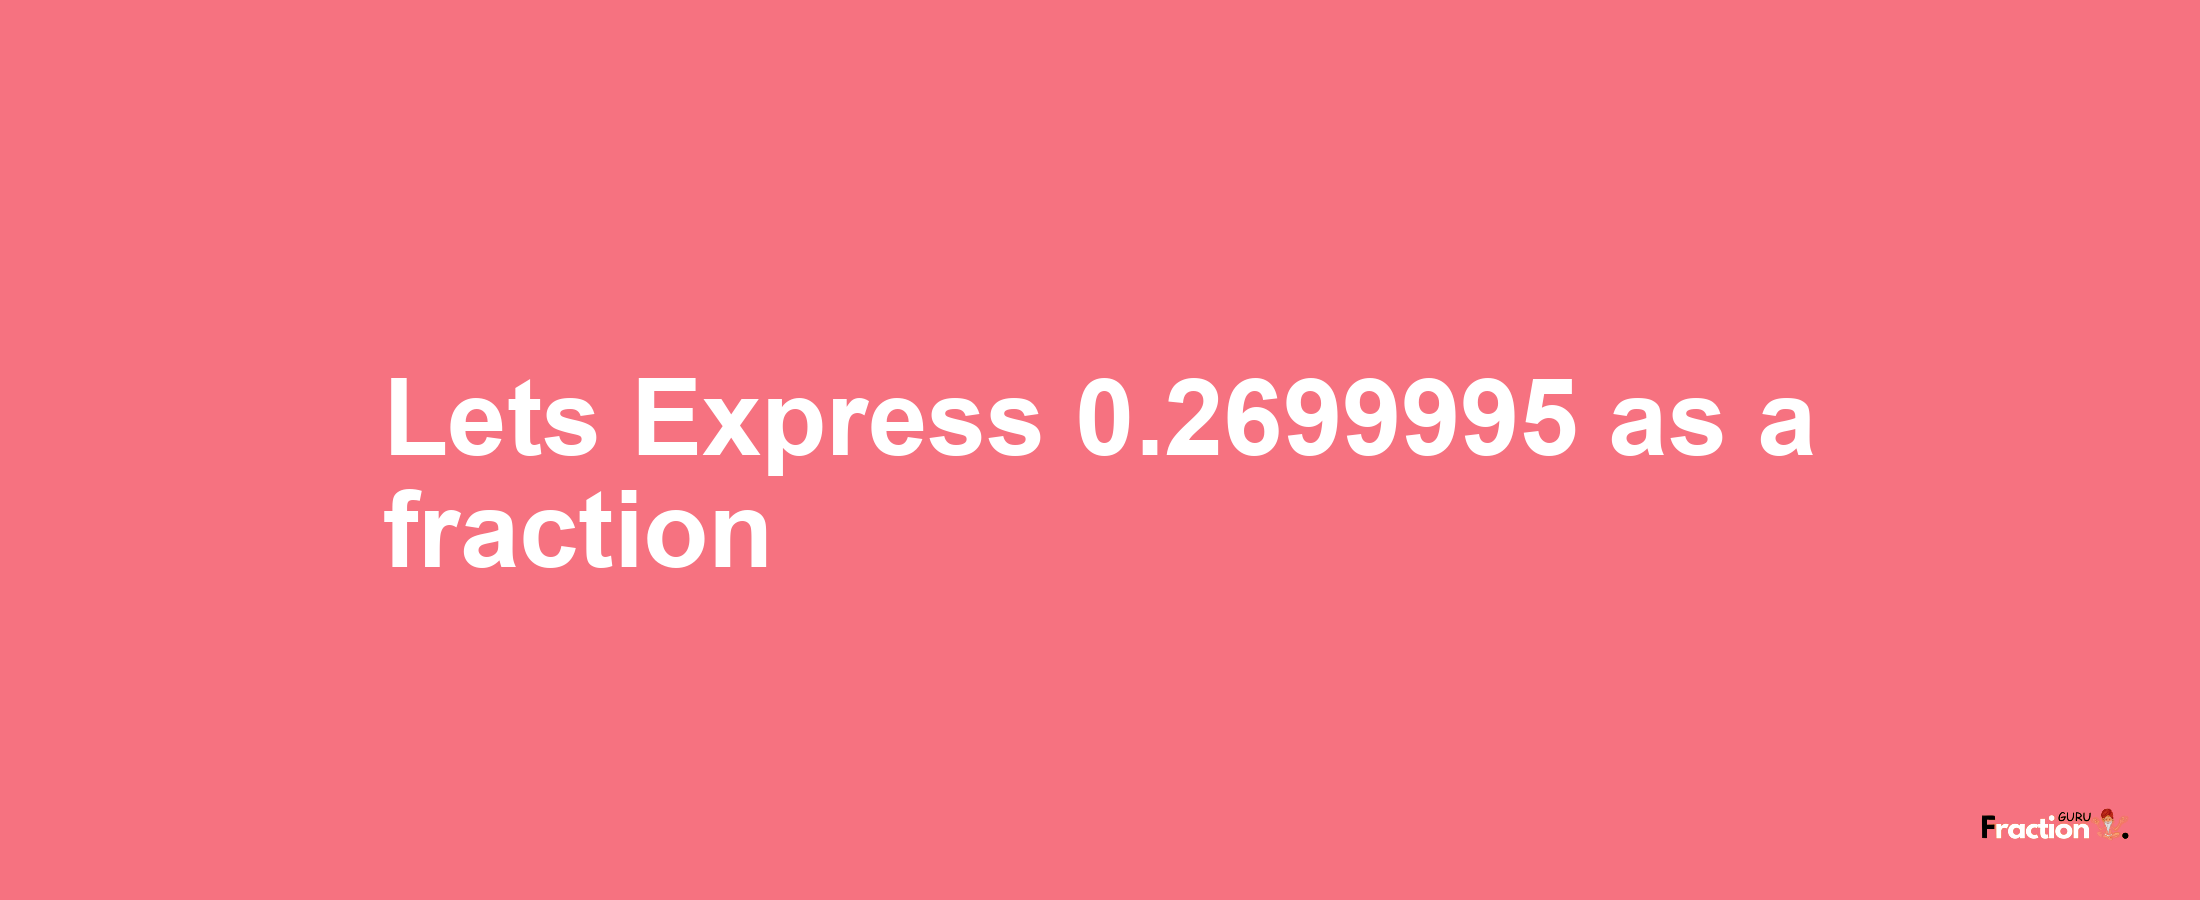 Lets Express 0.2699995 as afraction